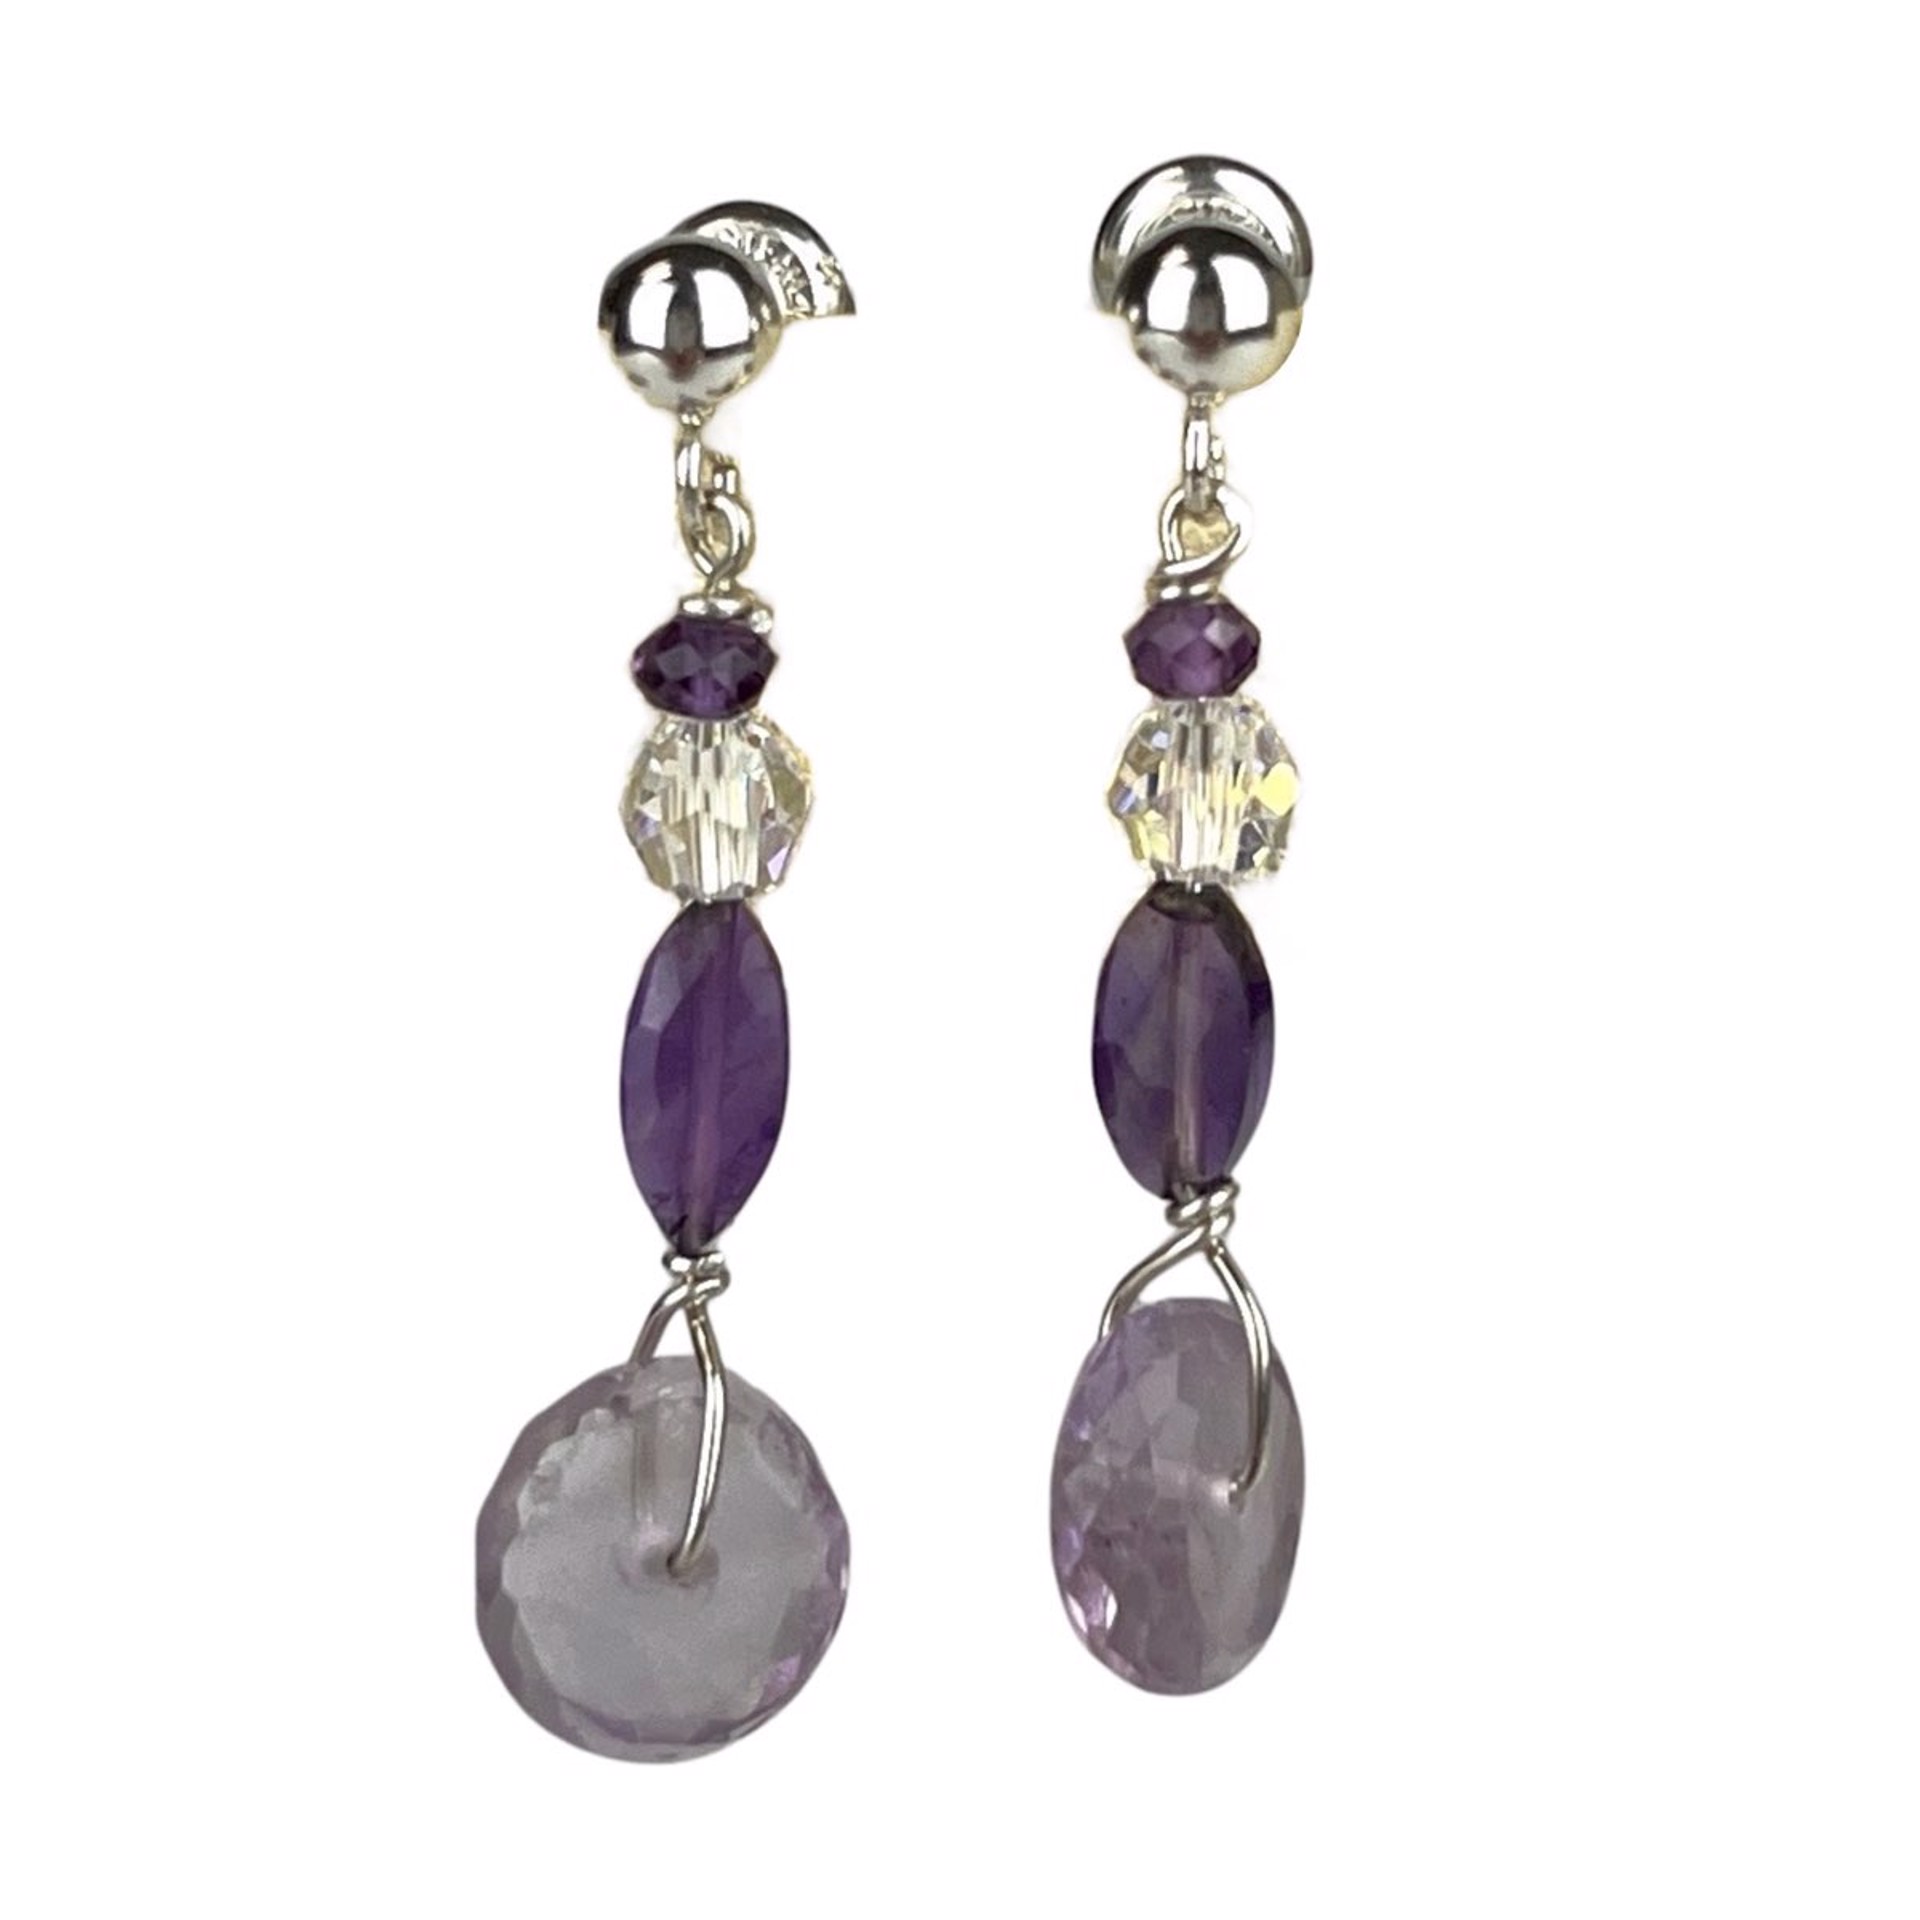 Faceted Amethyst Discs with Amethyst & Swarovski Sterling Silver Earrings by Nola Smodic